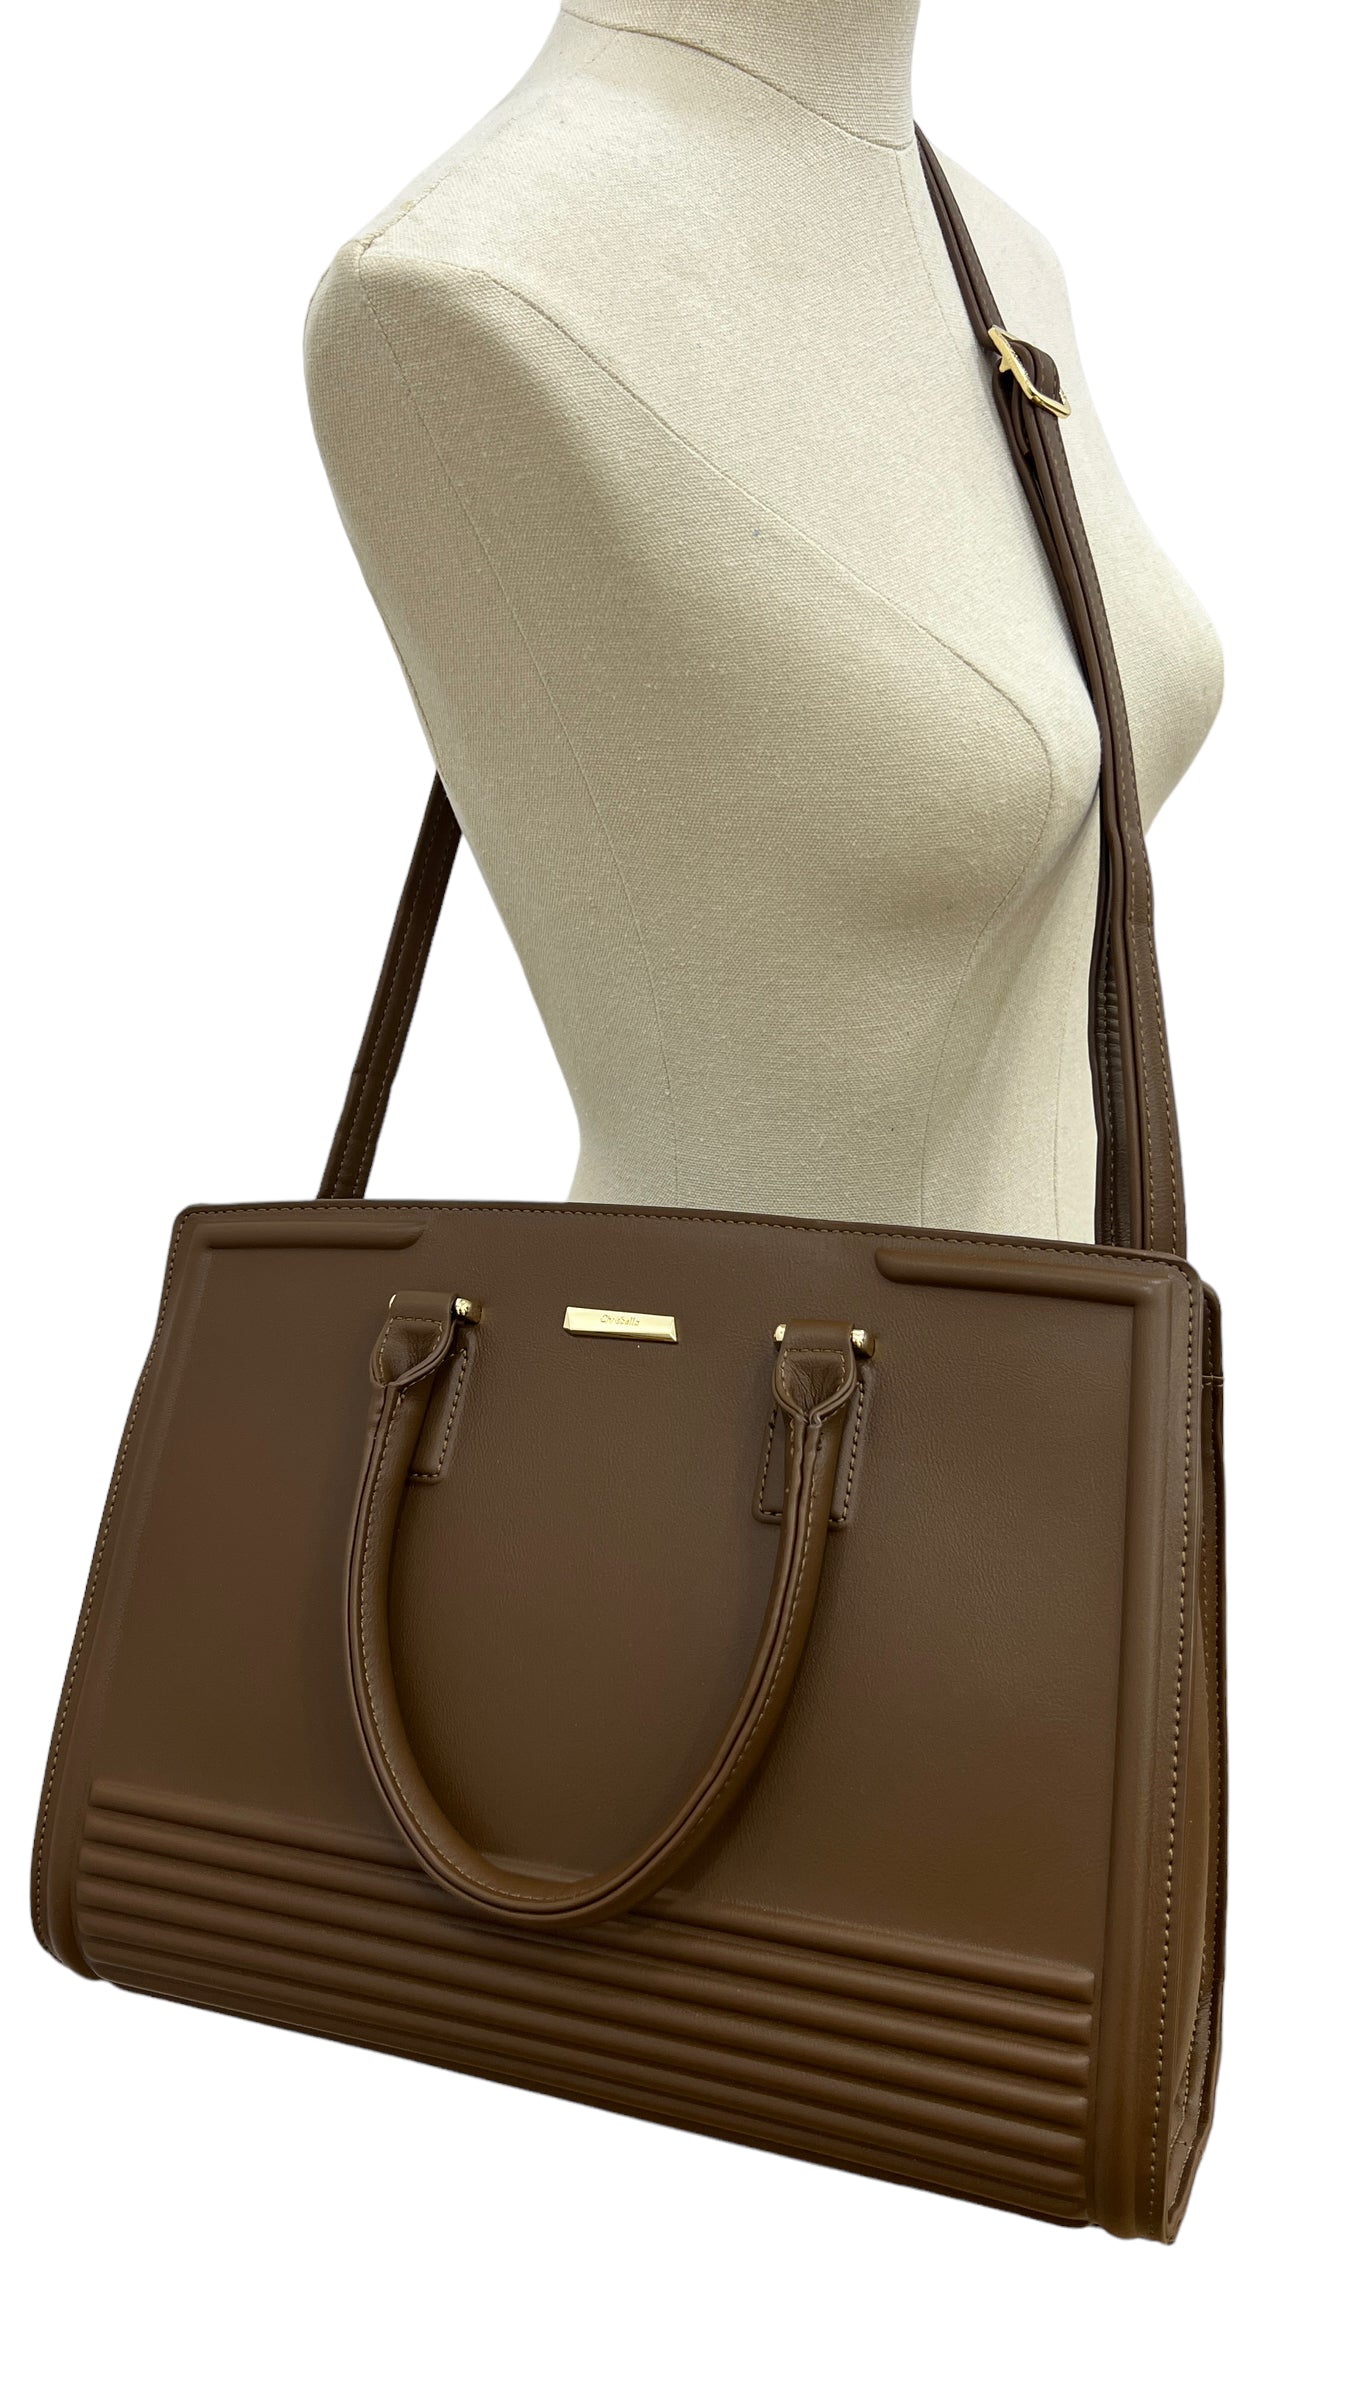 CHRISBELLA COFFEE LARGE DOUBLE HANDLE STRUCTURED BAG